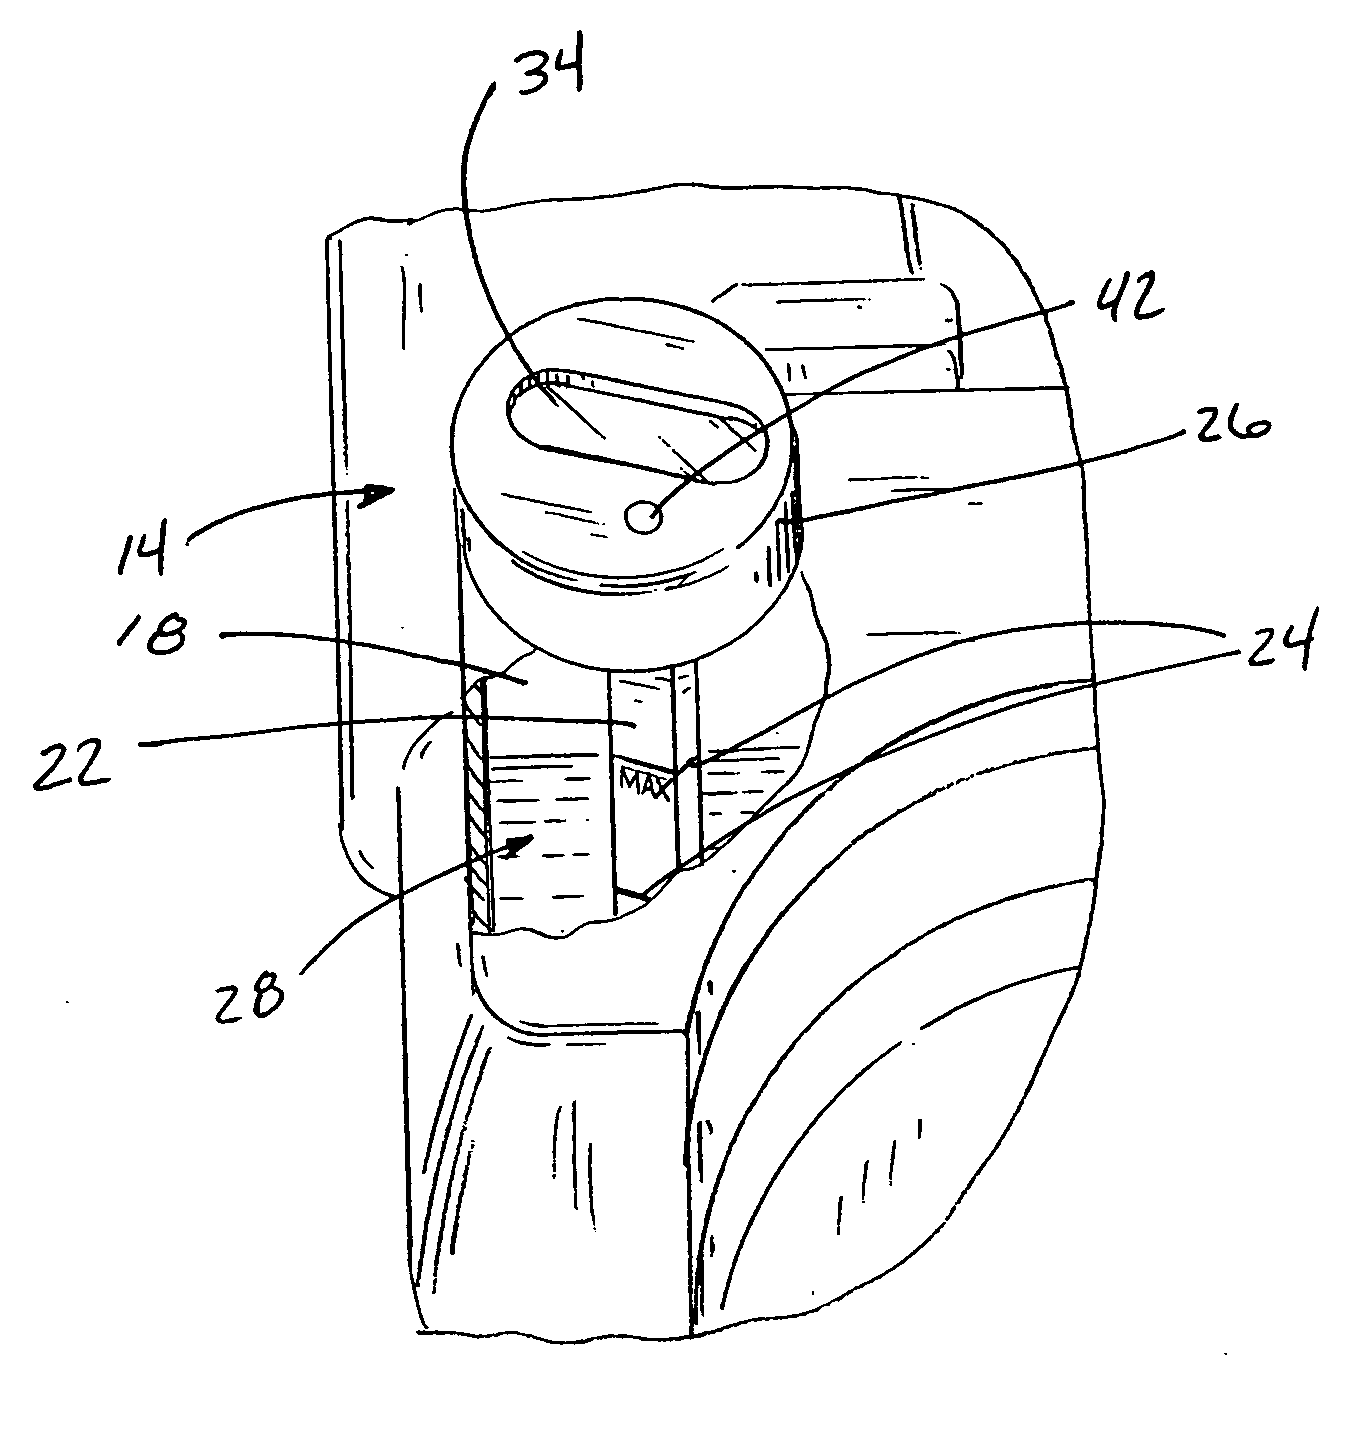 Apparatus for indicating oil temperature and oil level within an oil reservoir